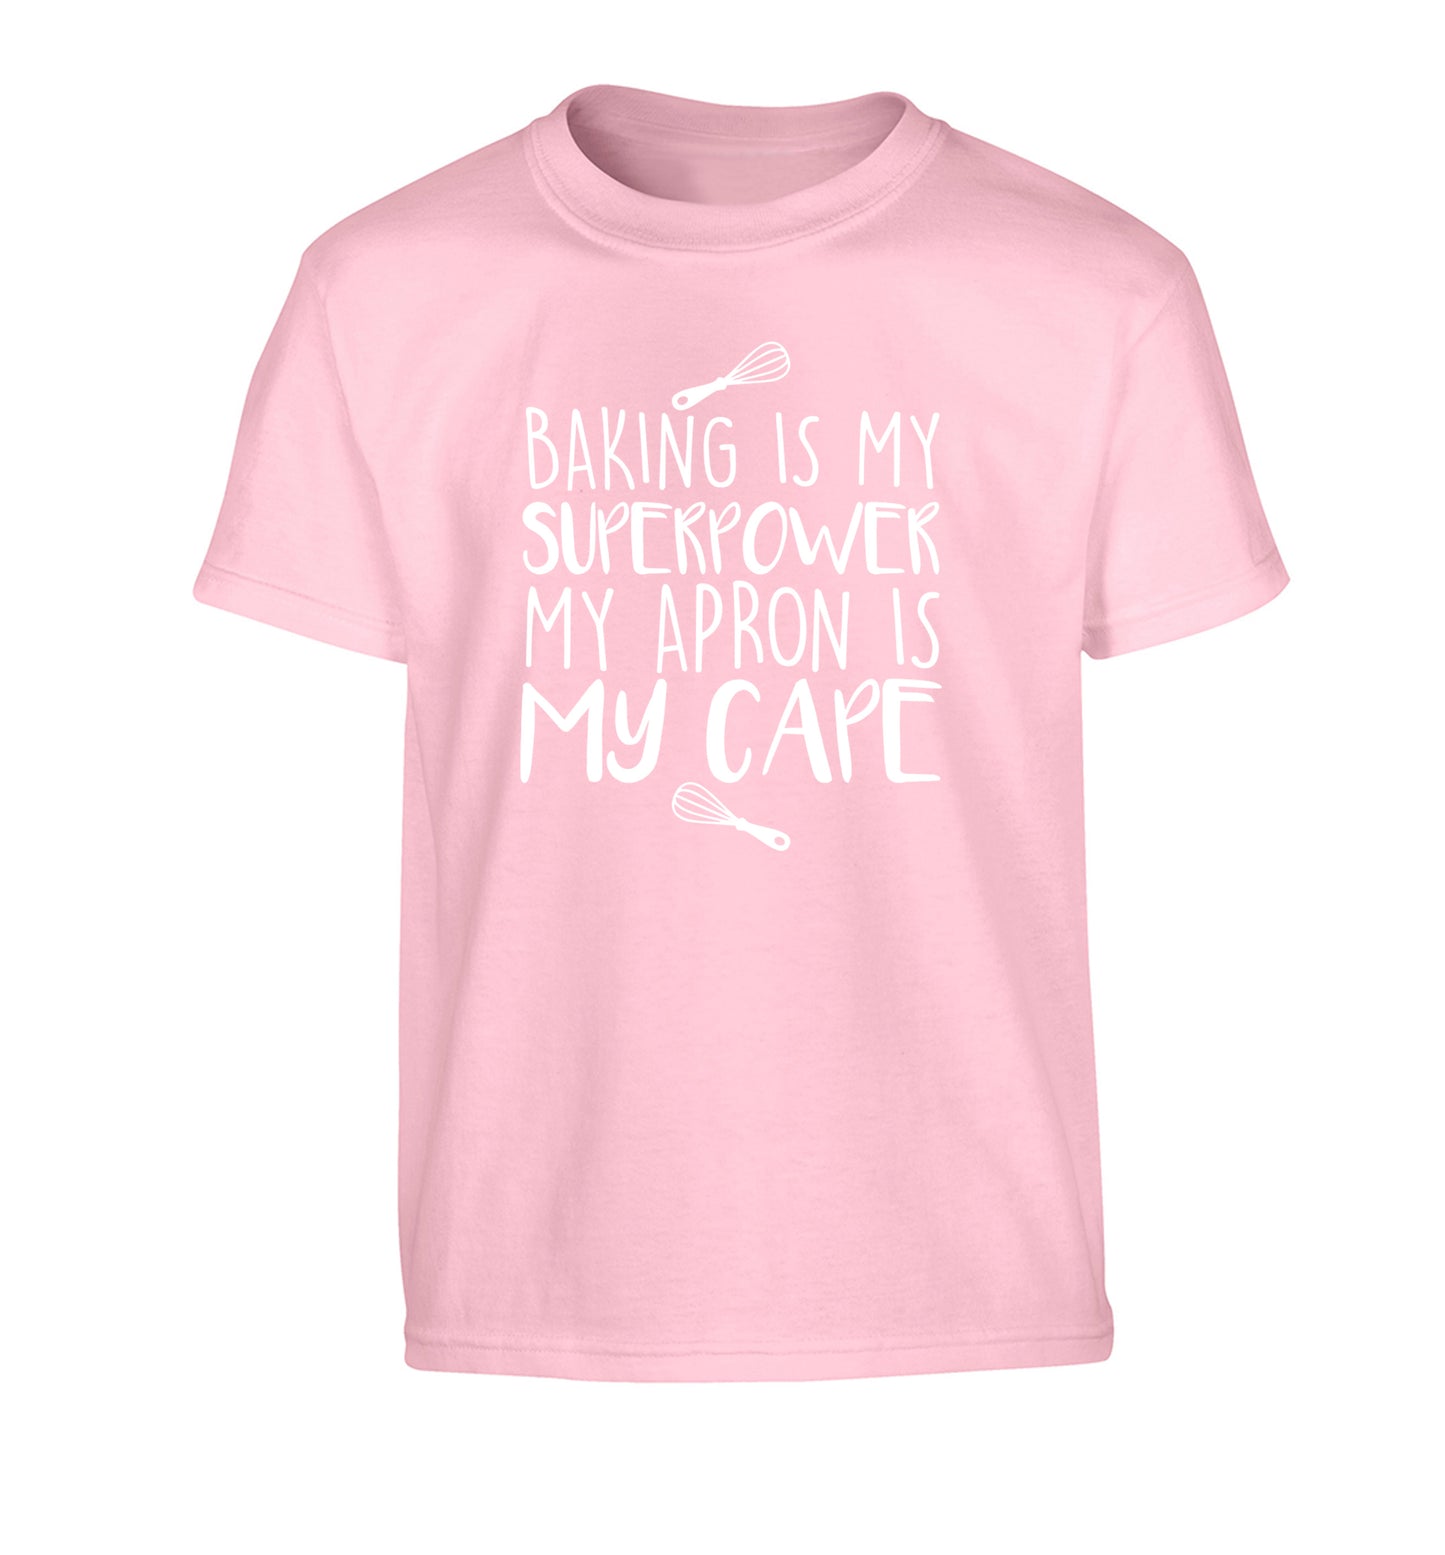 Baking is my superpower my apron is my cape Children's light pink Tshirt 12-14 Years